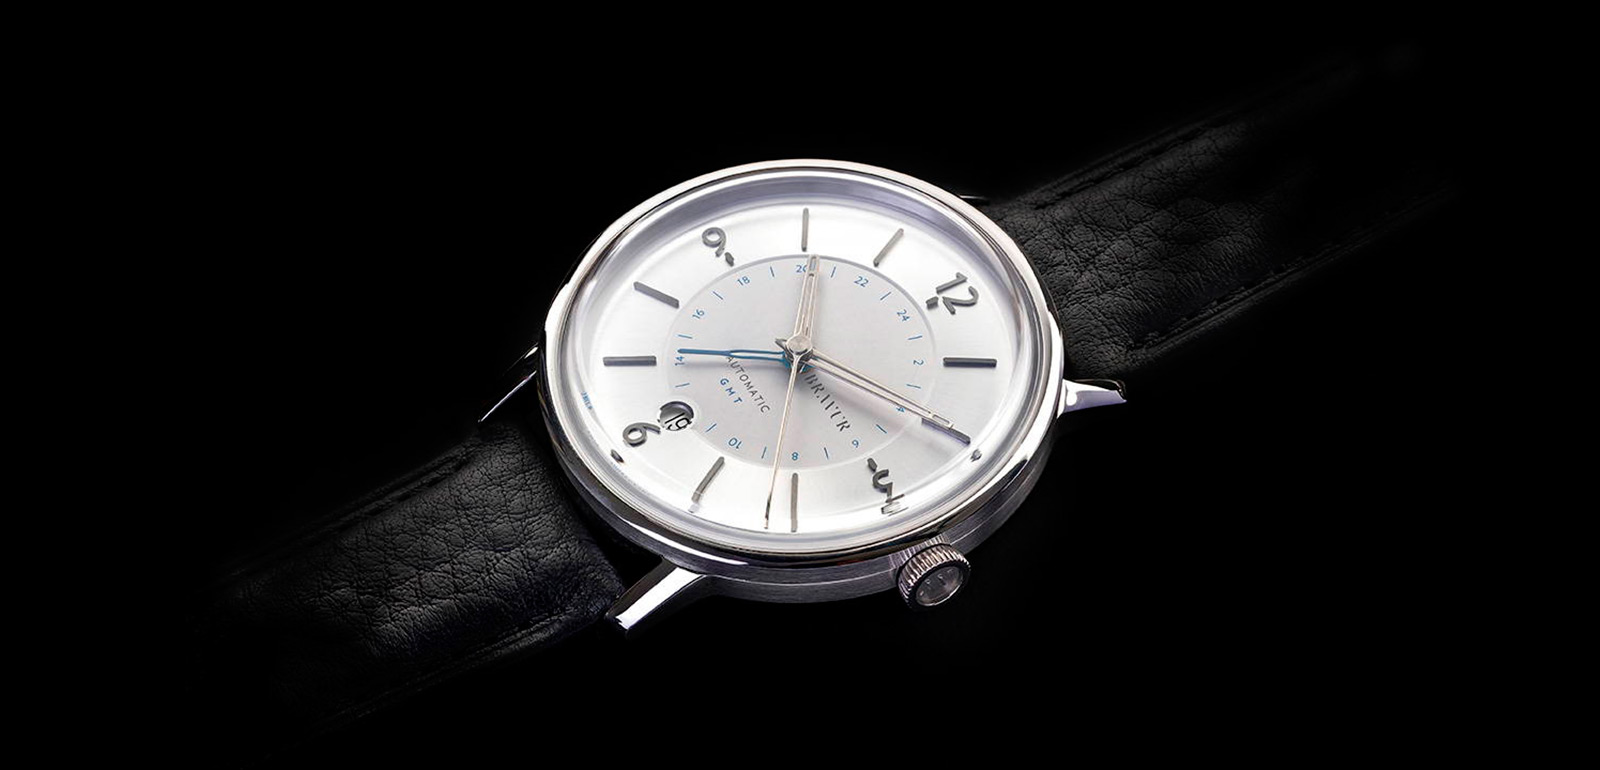 Bravur Geography GMT Limited Edition Watch | aBlogtoWatch